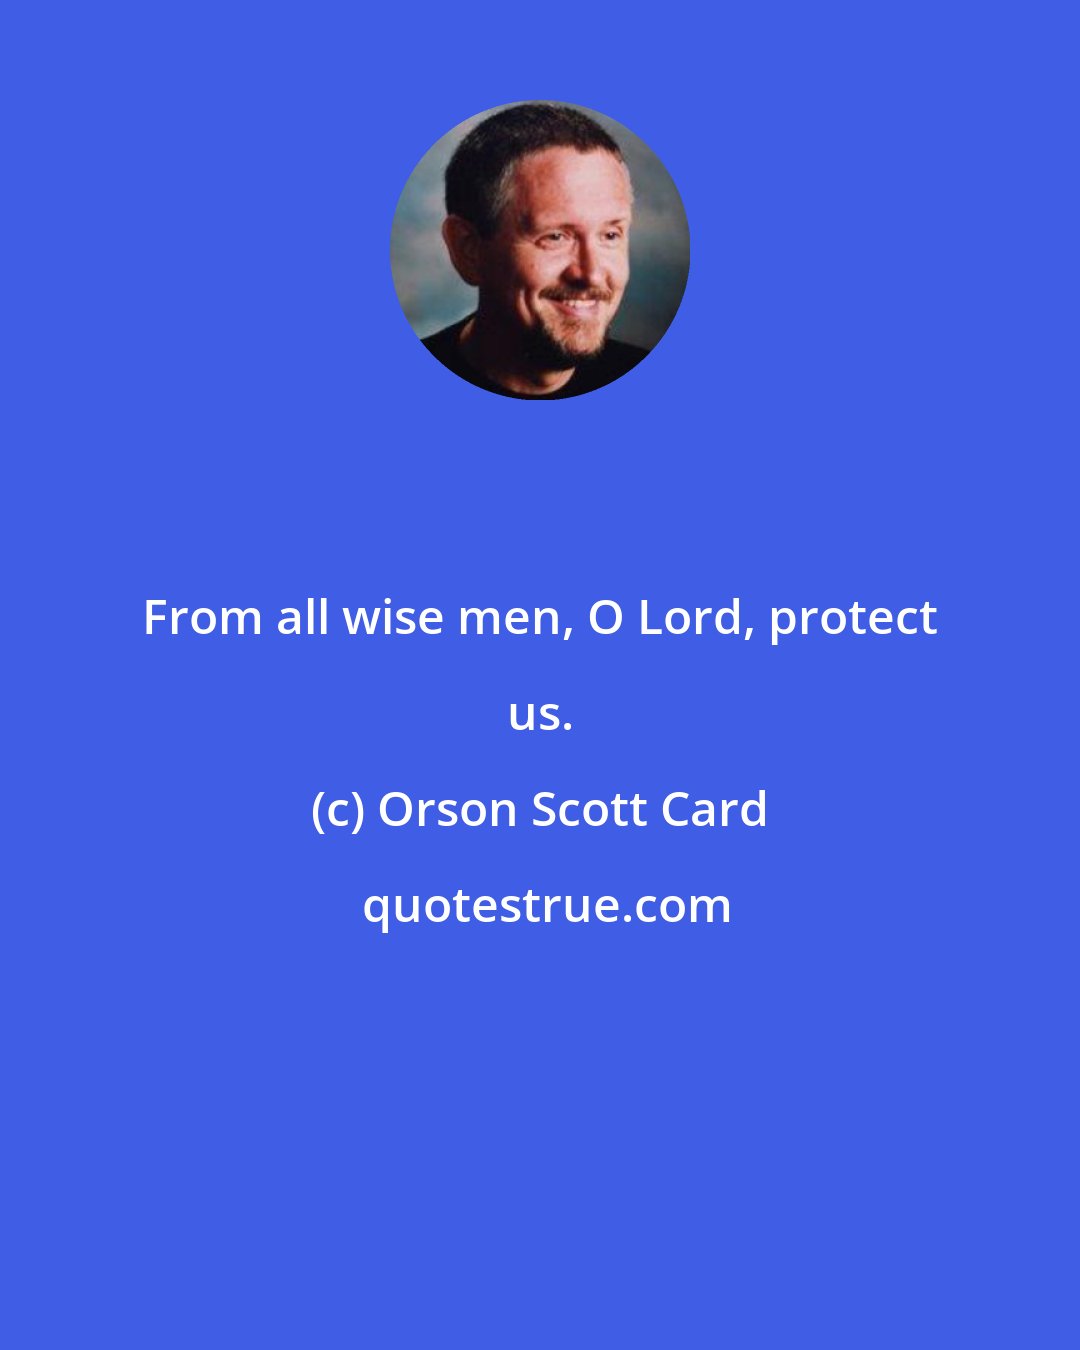 Orson Scott Card: From all wise men, O Lord, protect us.